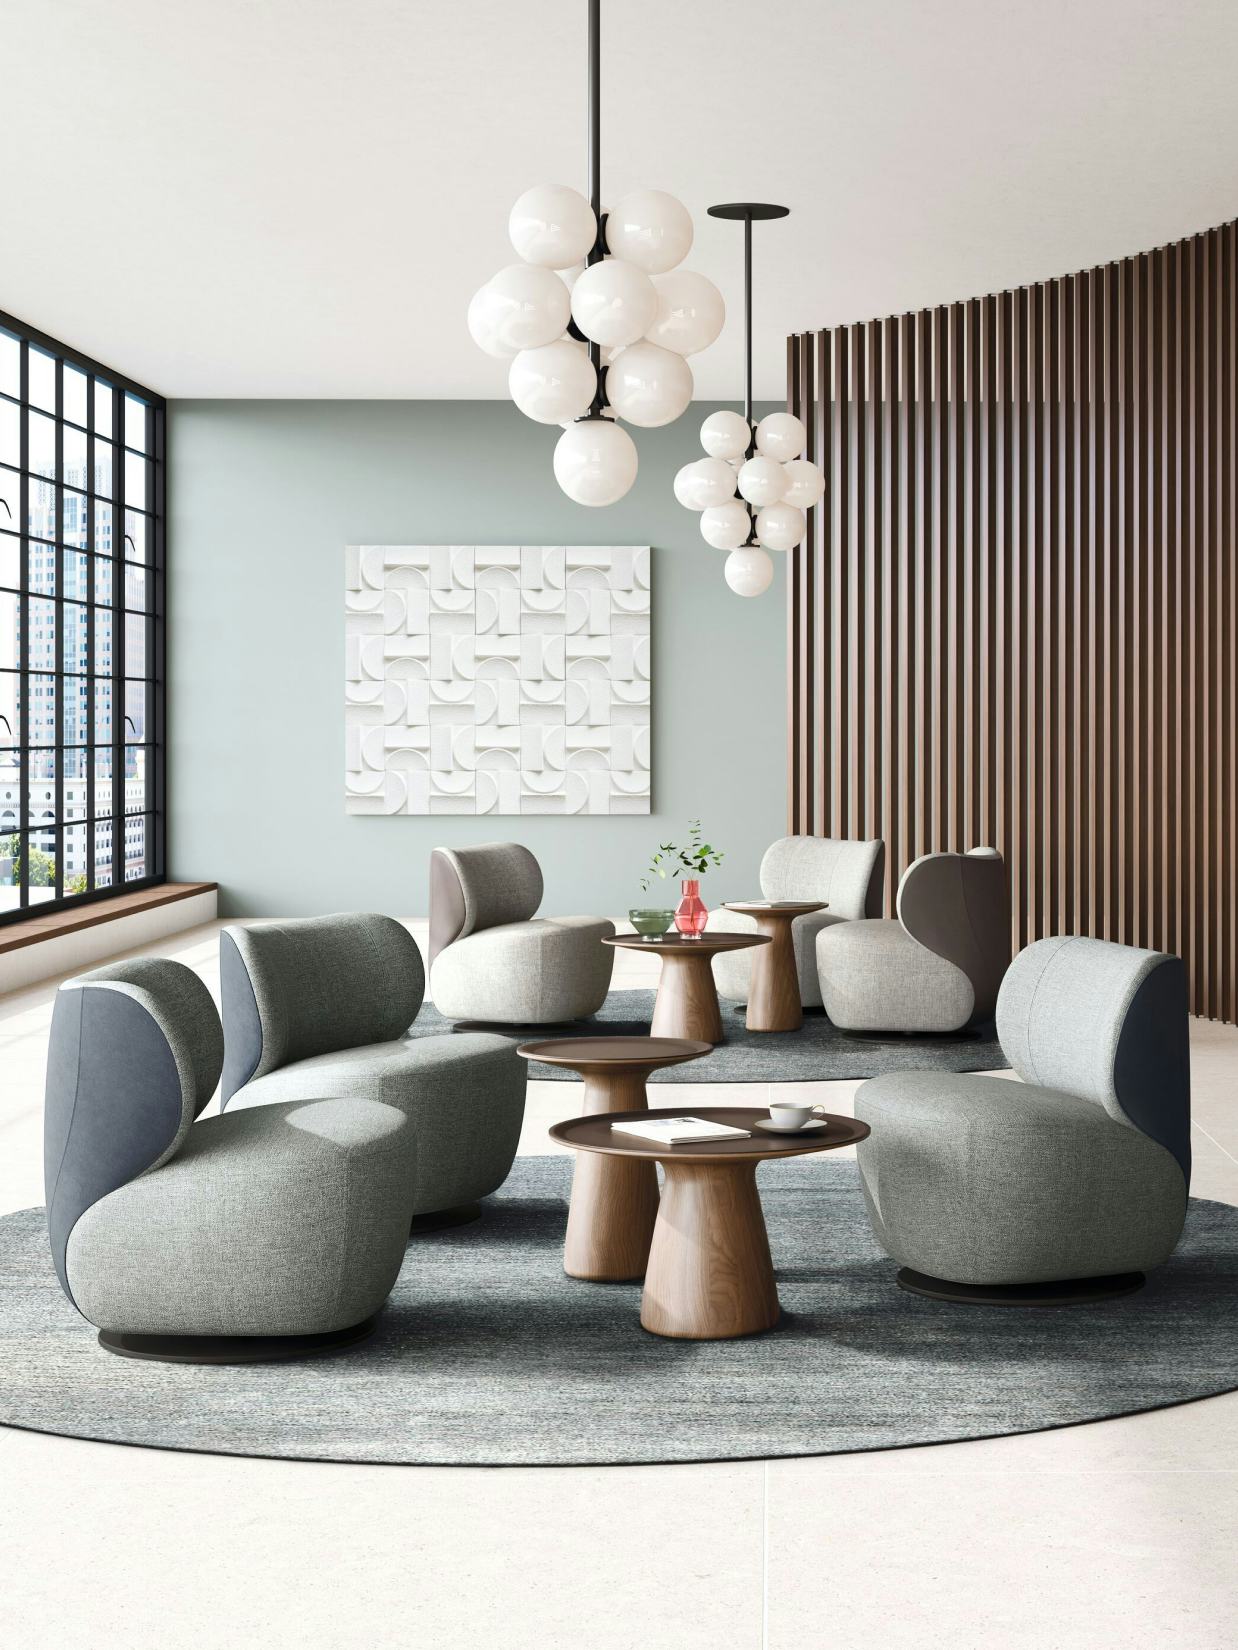 Walter Knoll - Timeless comfort for your home